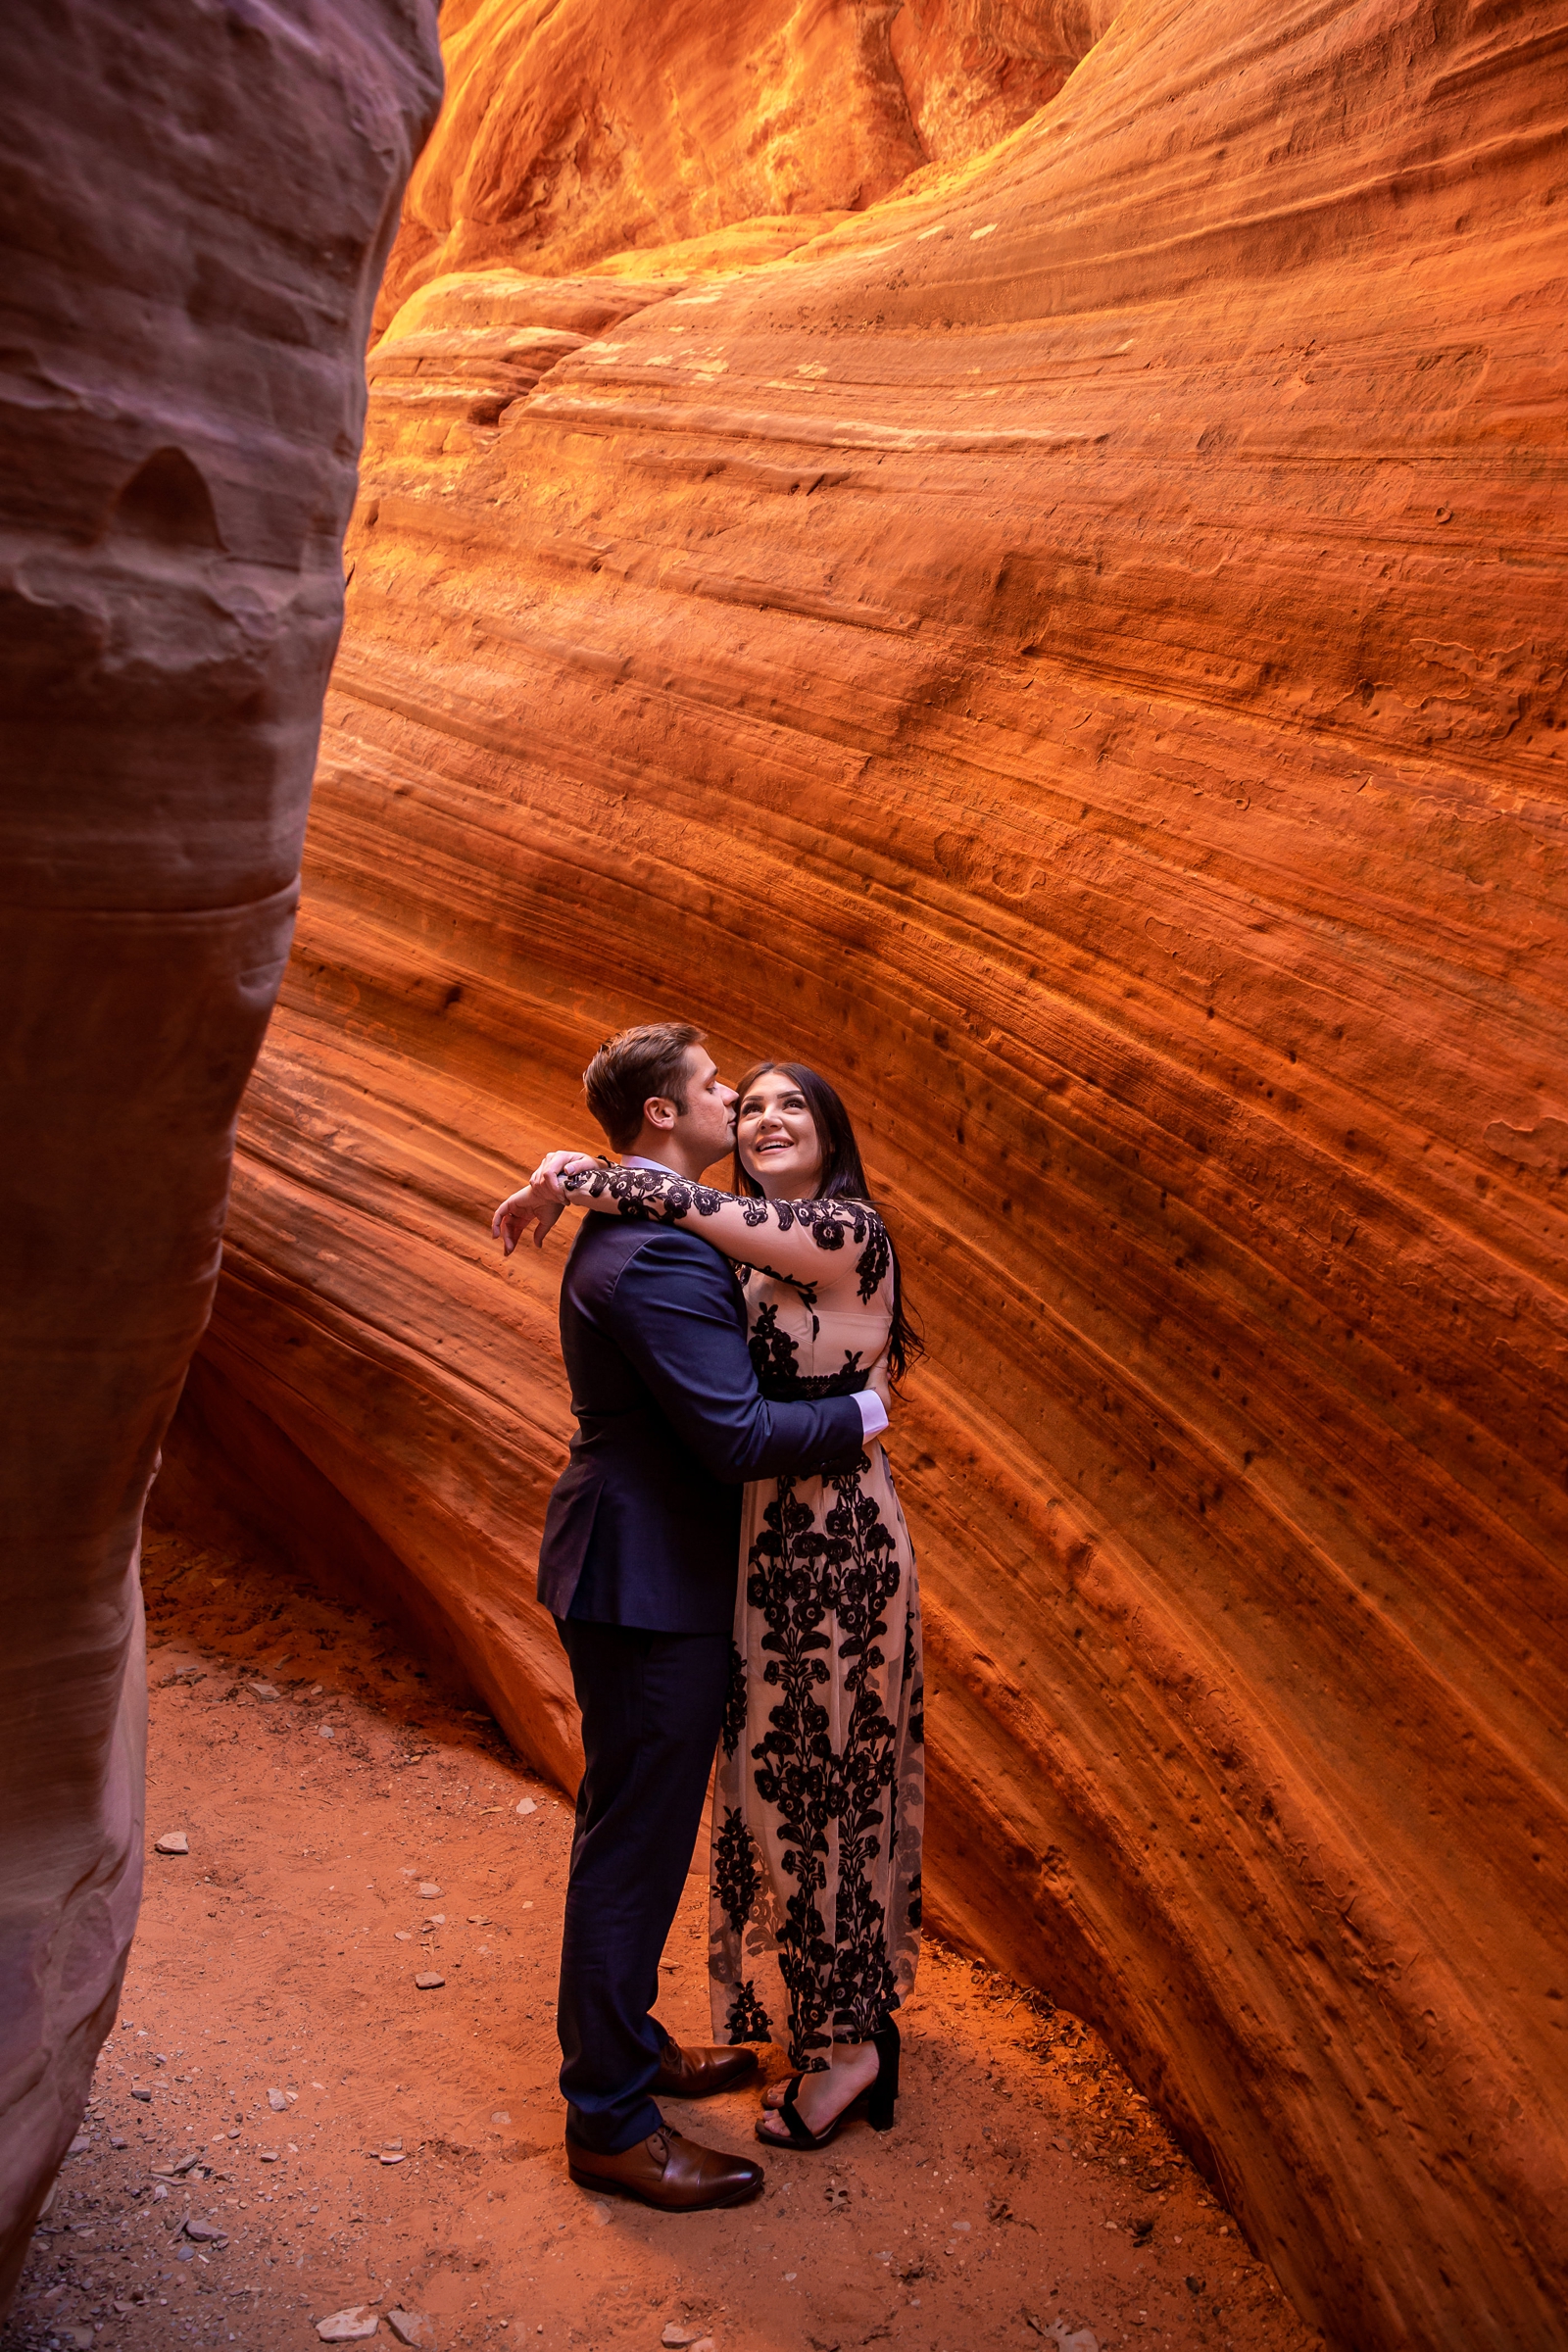 Adorable engaged couple in a glowing Utah slot canyon.